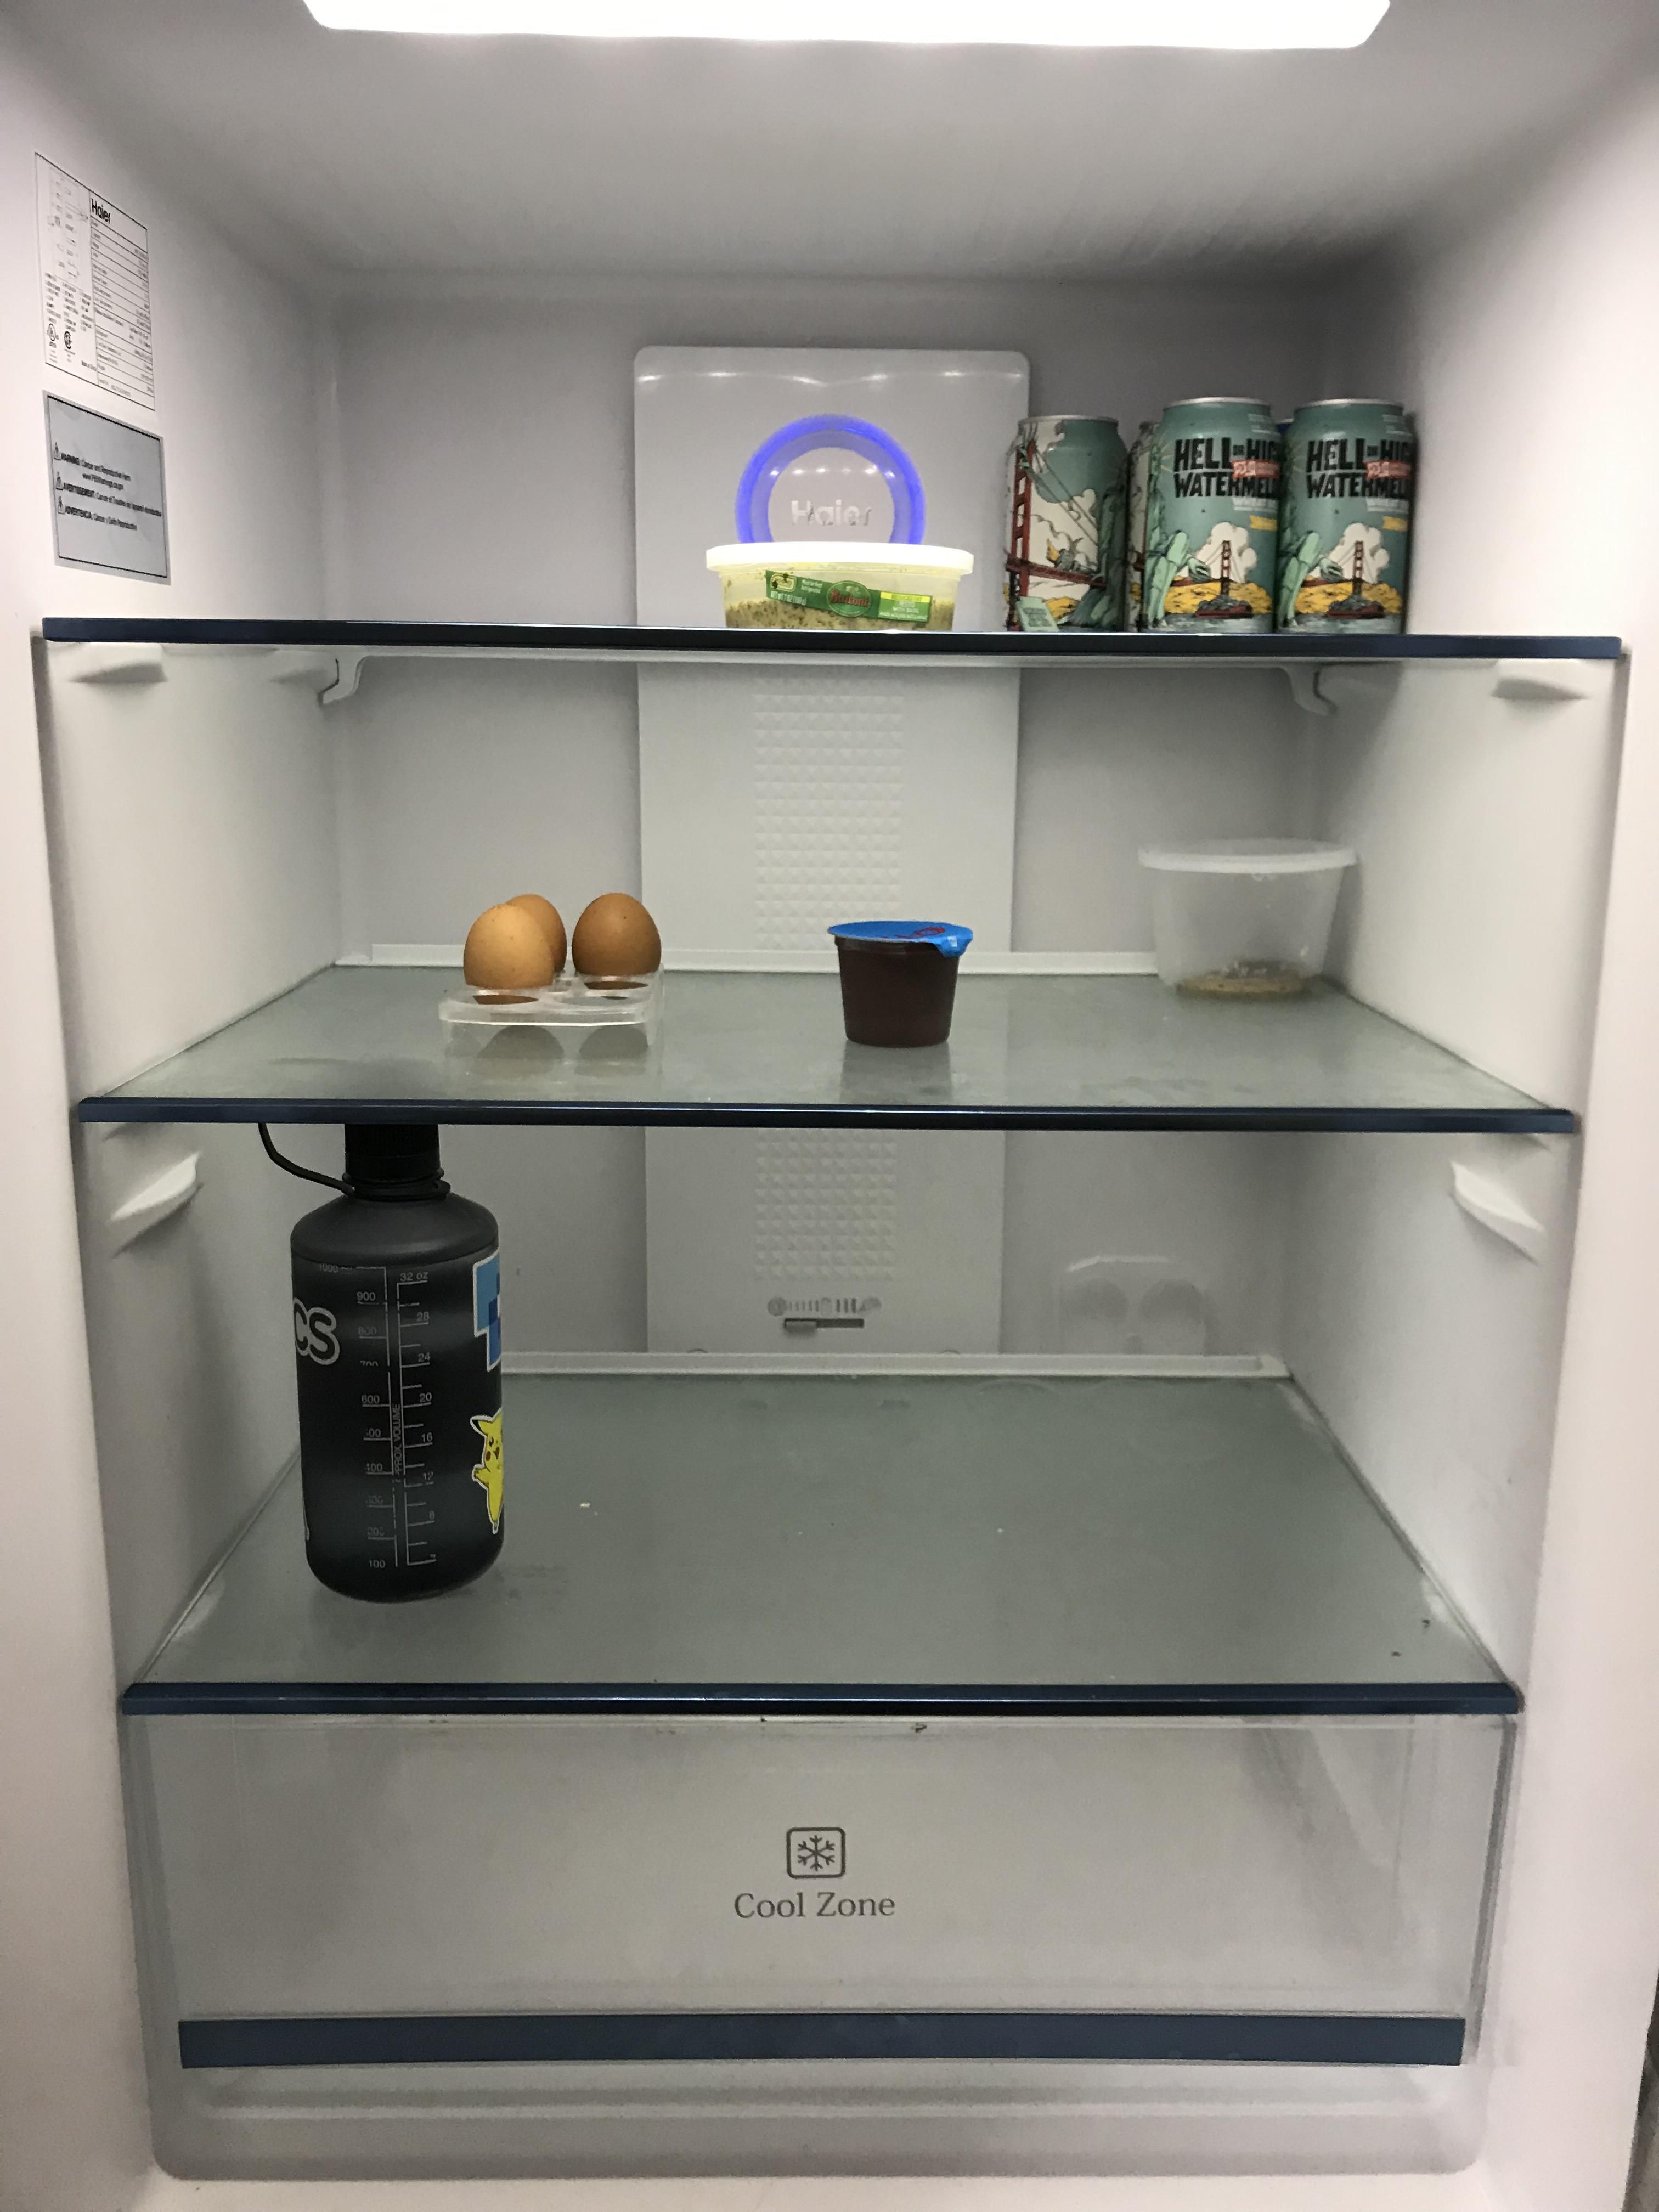 Today I opened my 29 year old boyfriend’s fridge. This is consistently what his fridge looks like. I fear for males everywhere. We must help them, but can they be helped??